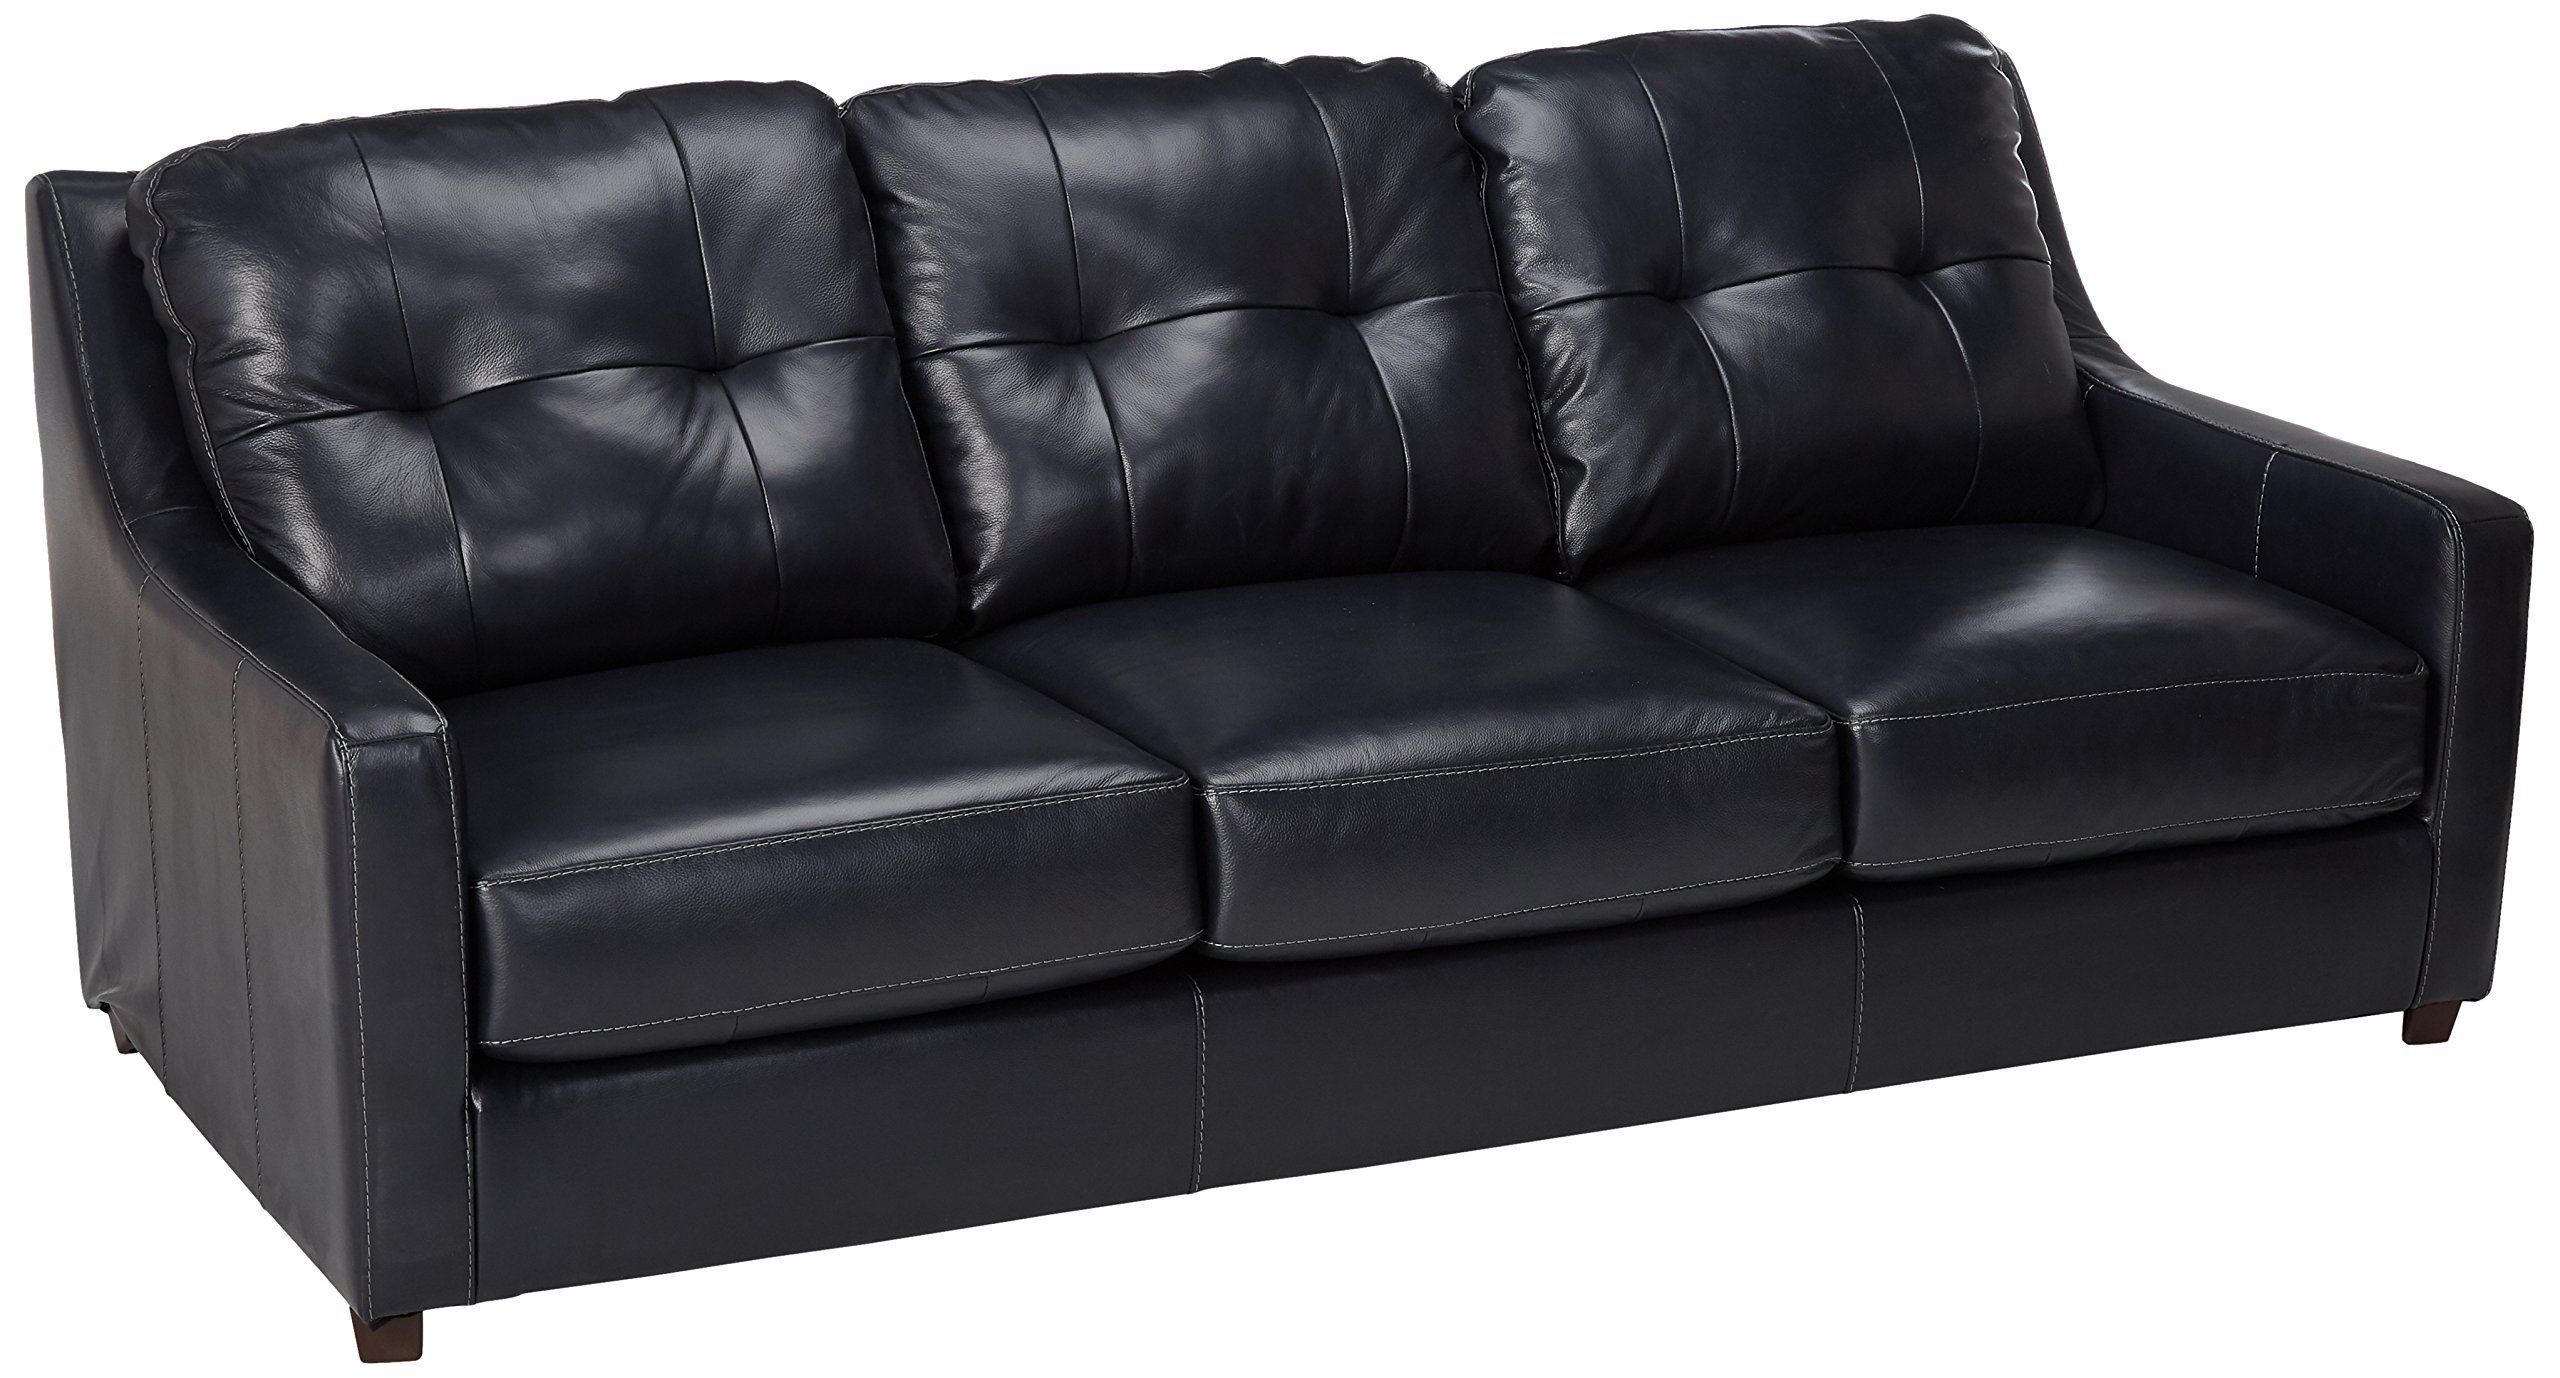 Ashley Furniture Signature Design Okean Upholstered Leather Queen With Regard To Navy Sleeper Sofa Couches (Gallery 6 of 20)